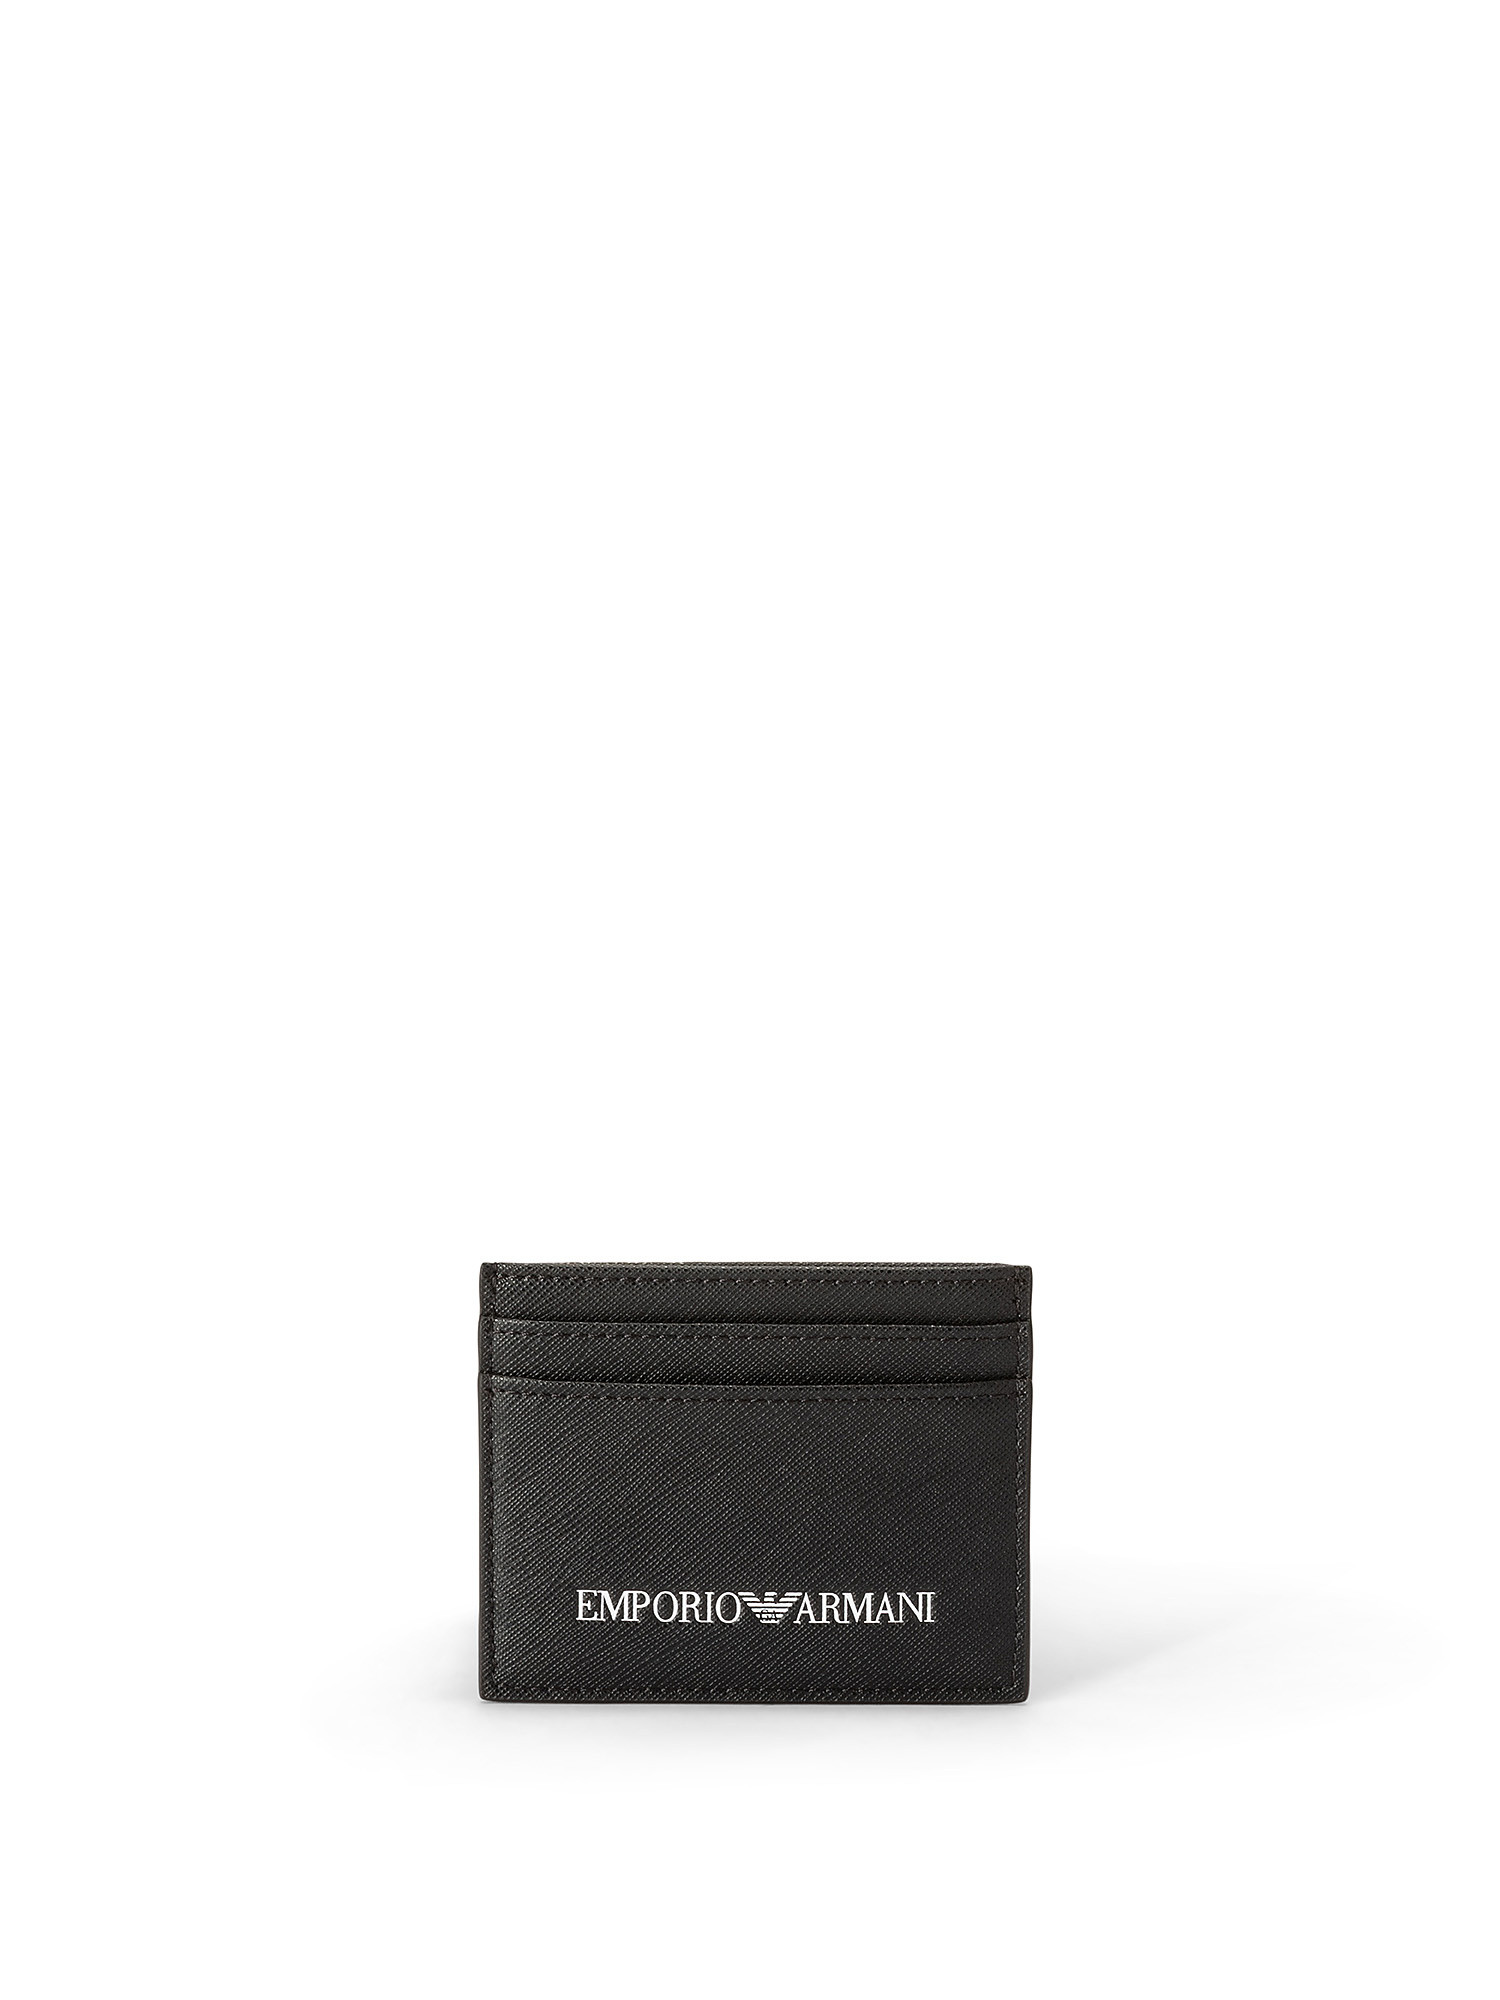 Emporio Armani - Card holder in saffiano print regenerated leather, Black, large image number 0